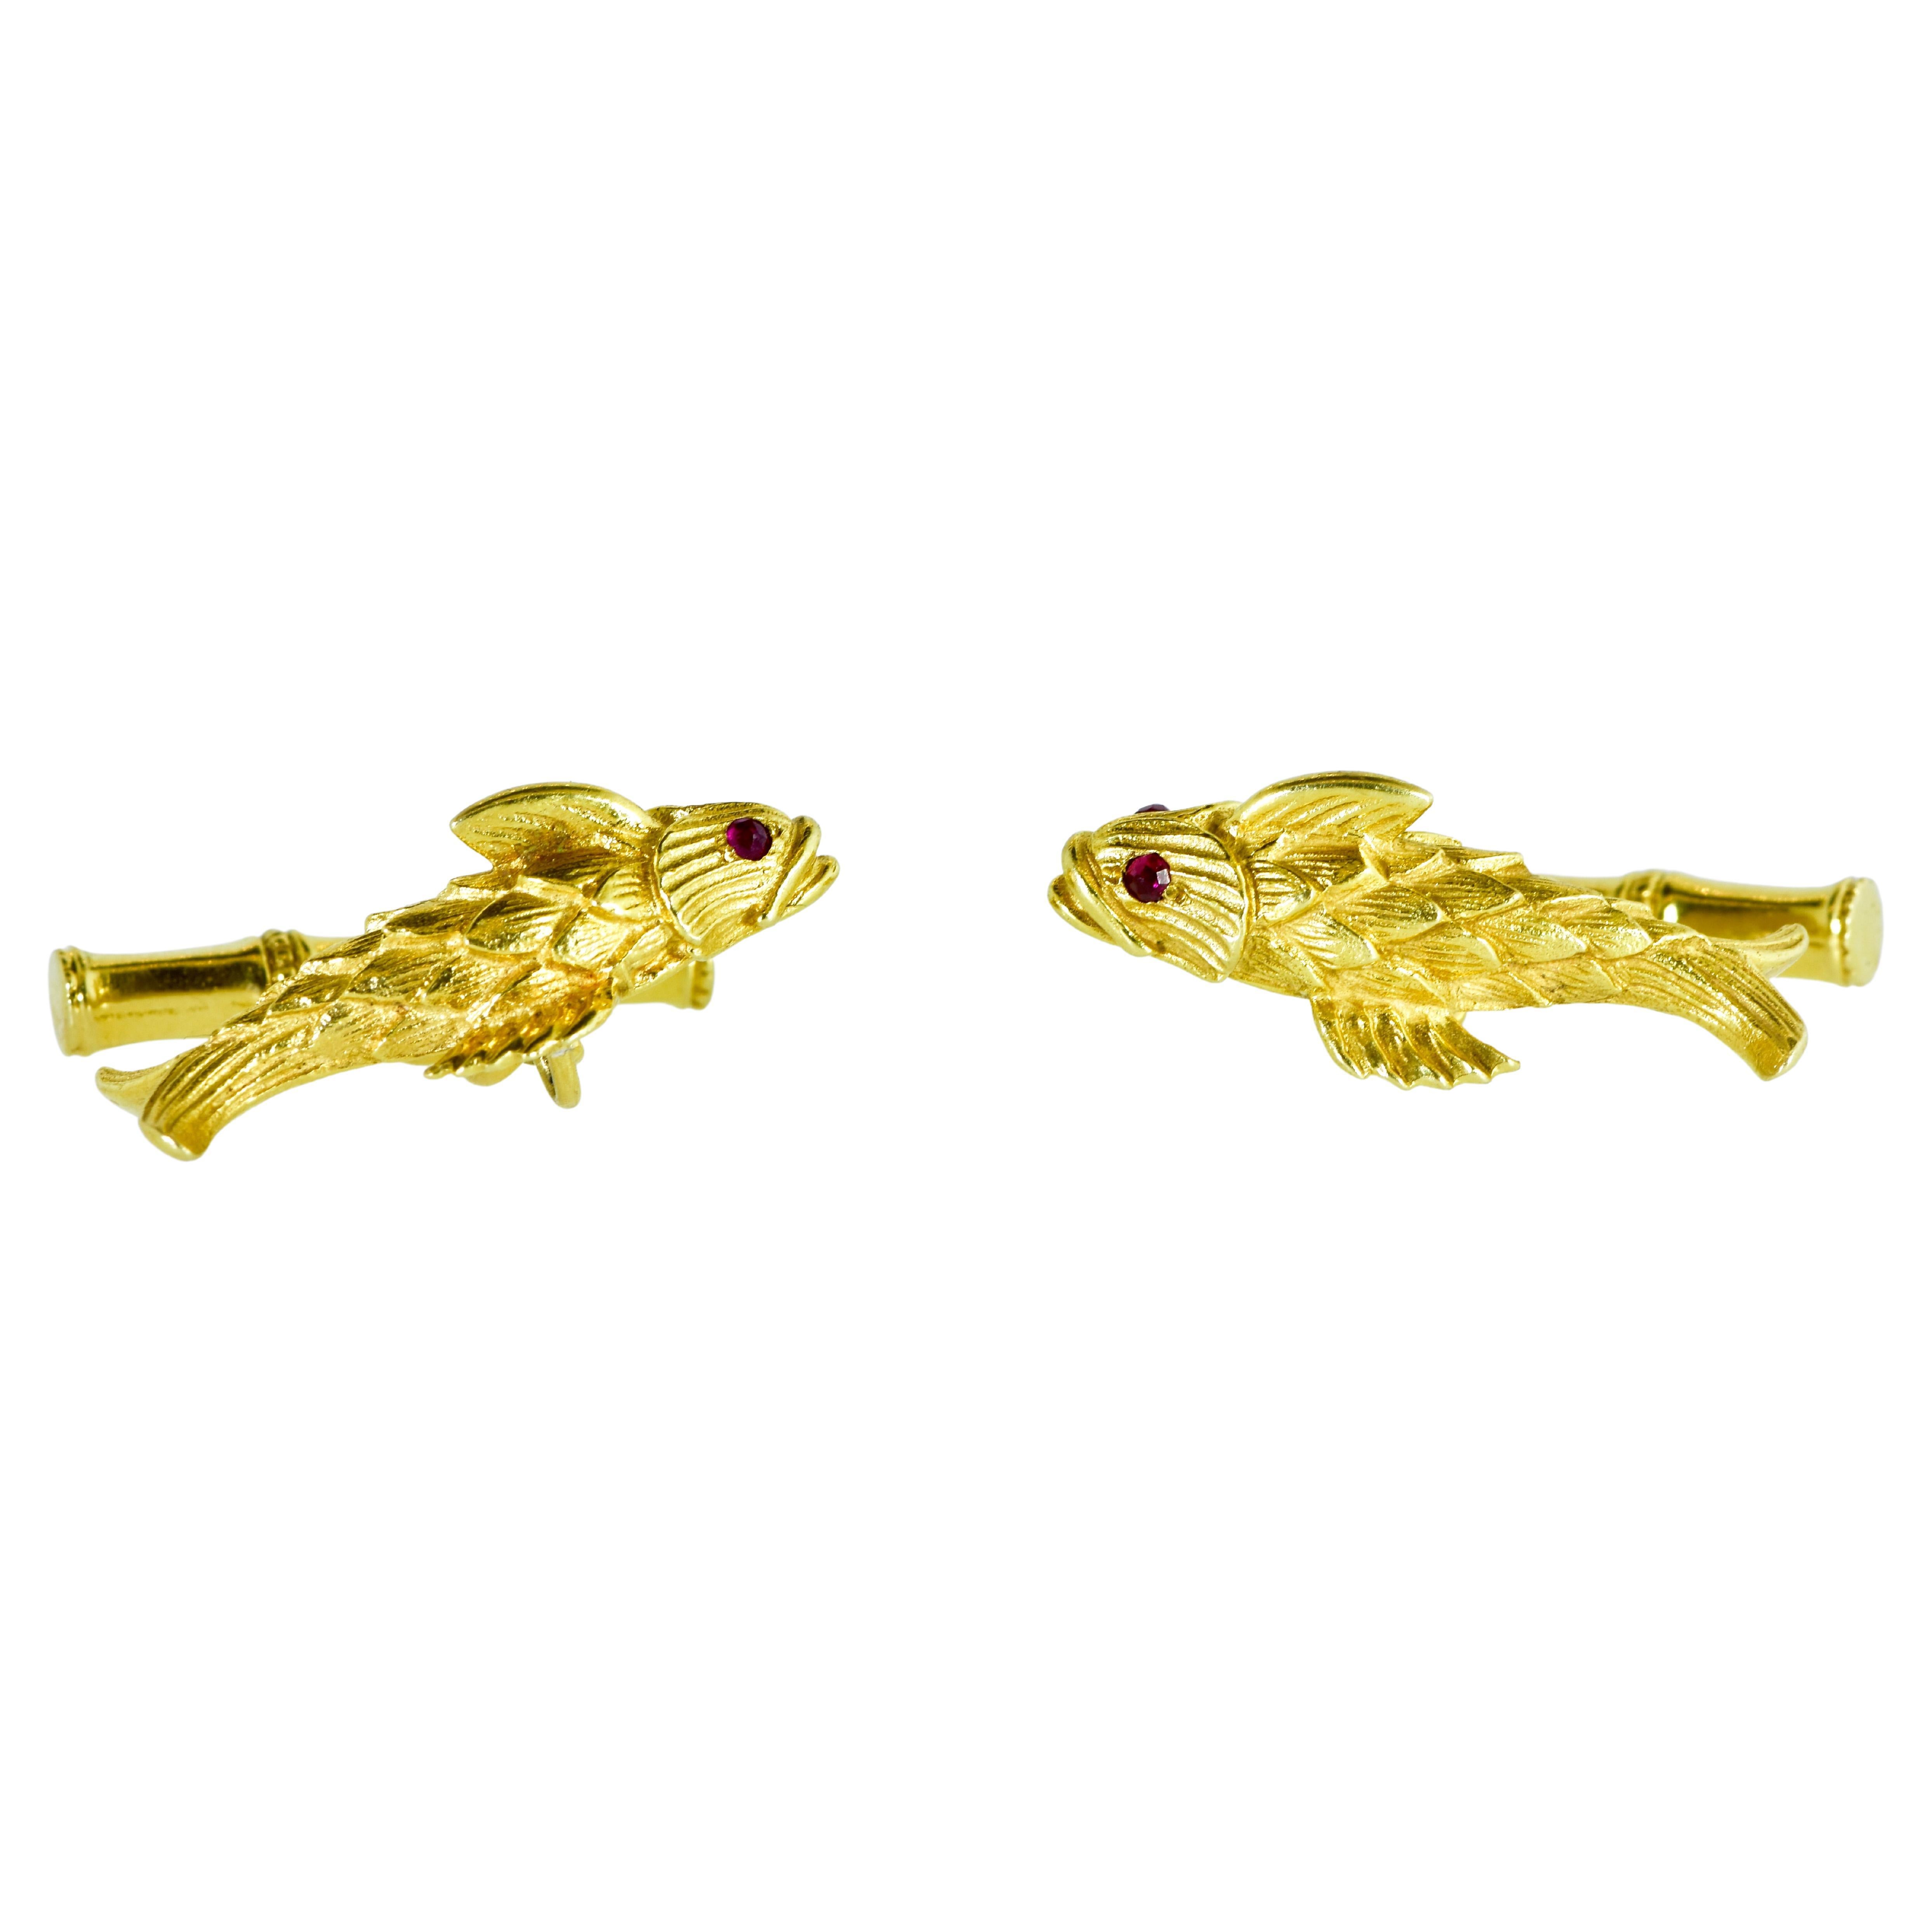 Jean Schlumberger for Tiffany 18K back to back cufflinks with a 